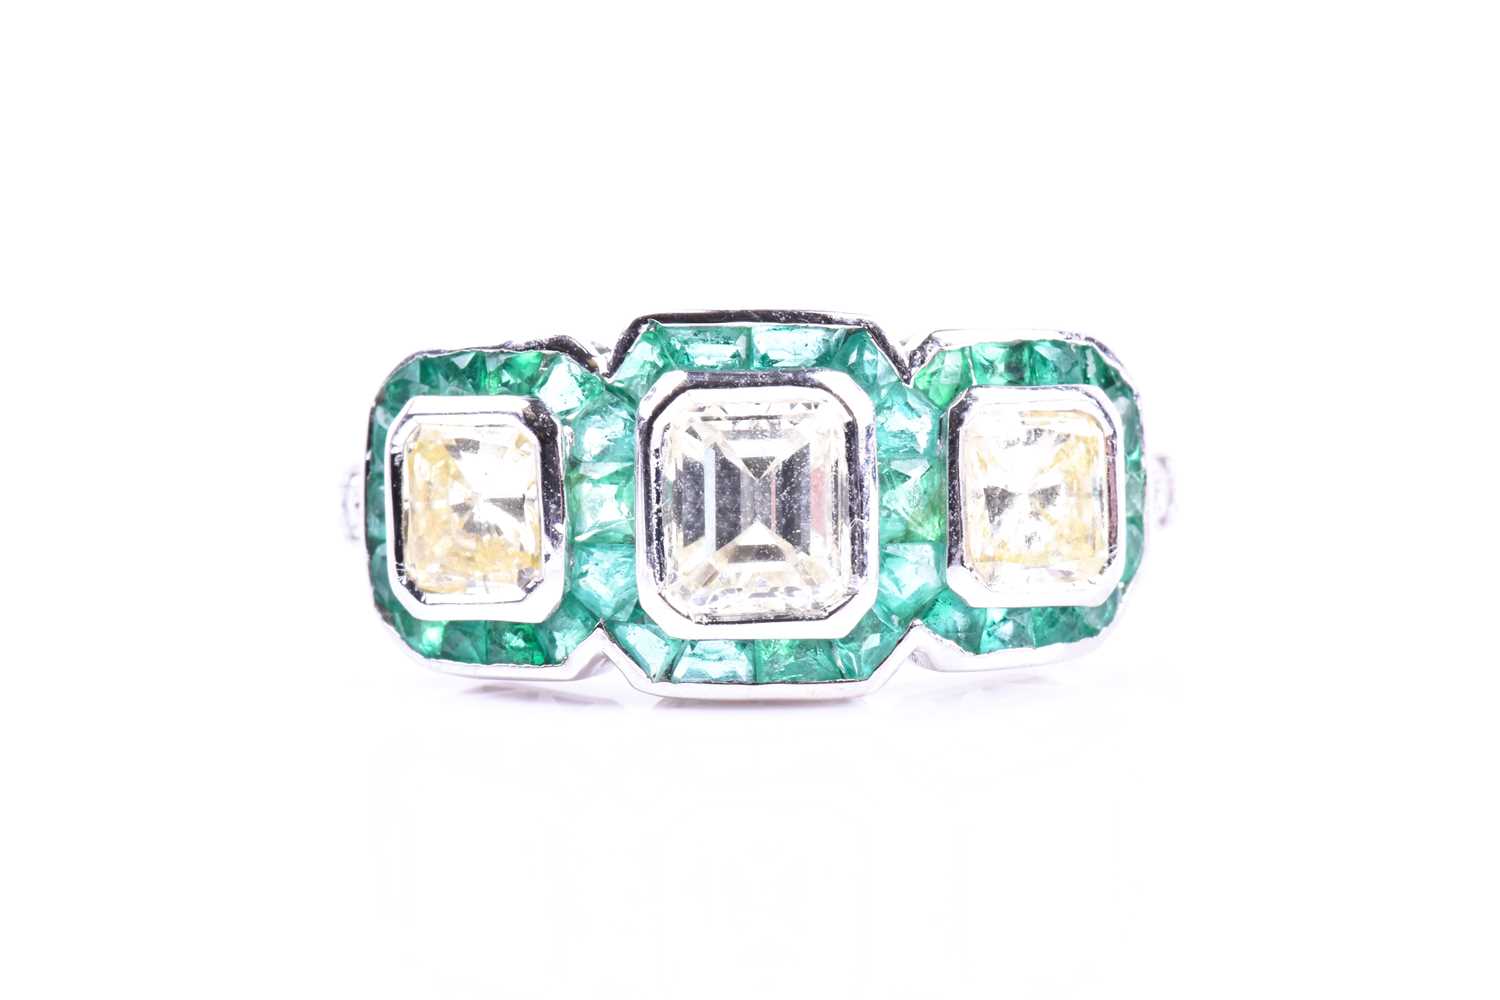 A diamond and emerald ring, set with an emerald-cut diamond flanked with two mixed square-cut